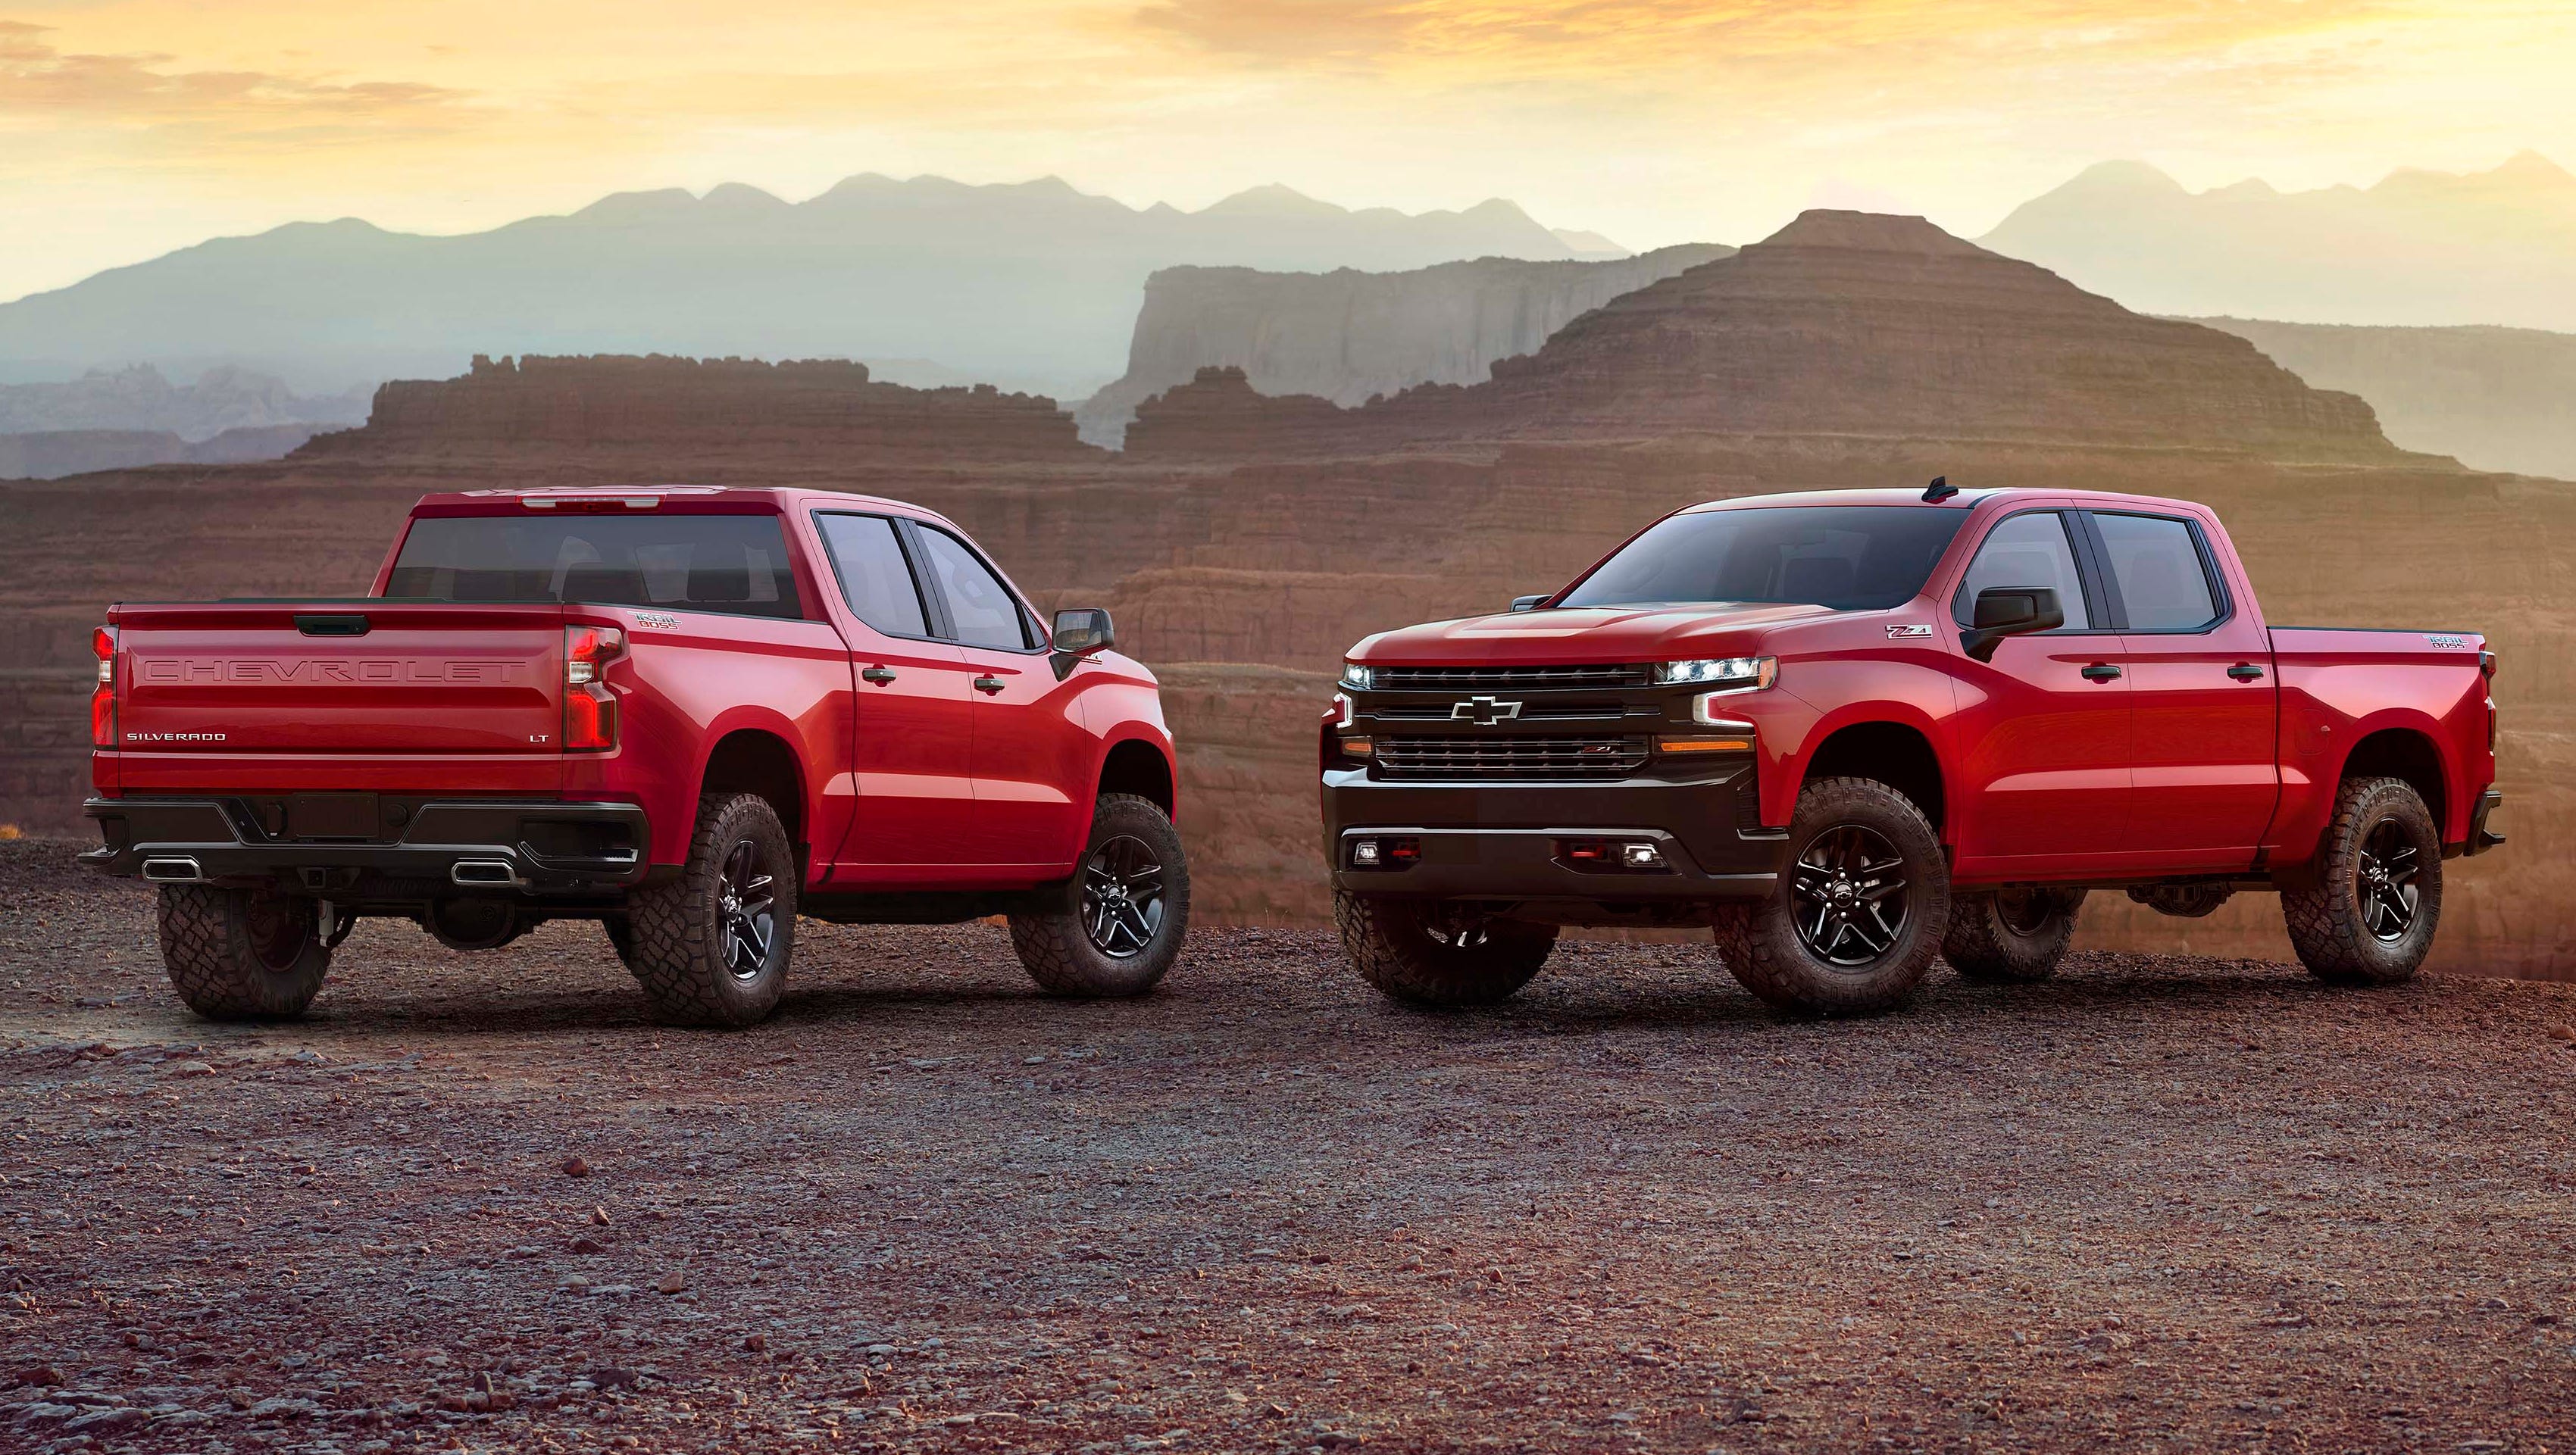 The 2019 Chevrolet Silverado was introduced in Dallas at an event celebrating 100 years of Chevy Trucks. All-new from the ground-up the Silverado features a high-strength, alloy steel bed in contrast to competitor Ford's F150 aluminum bed.